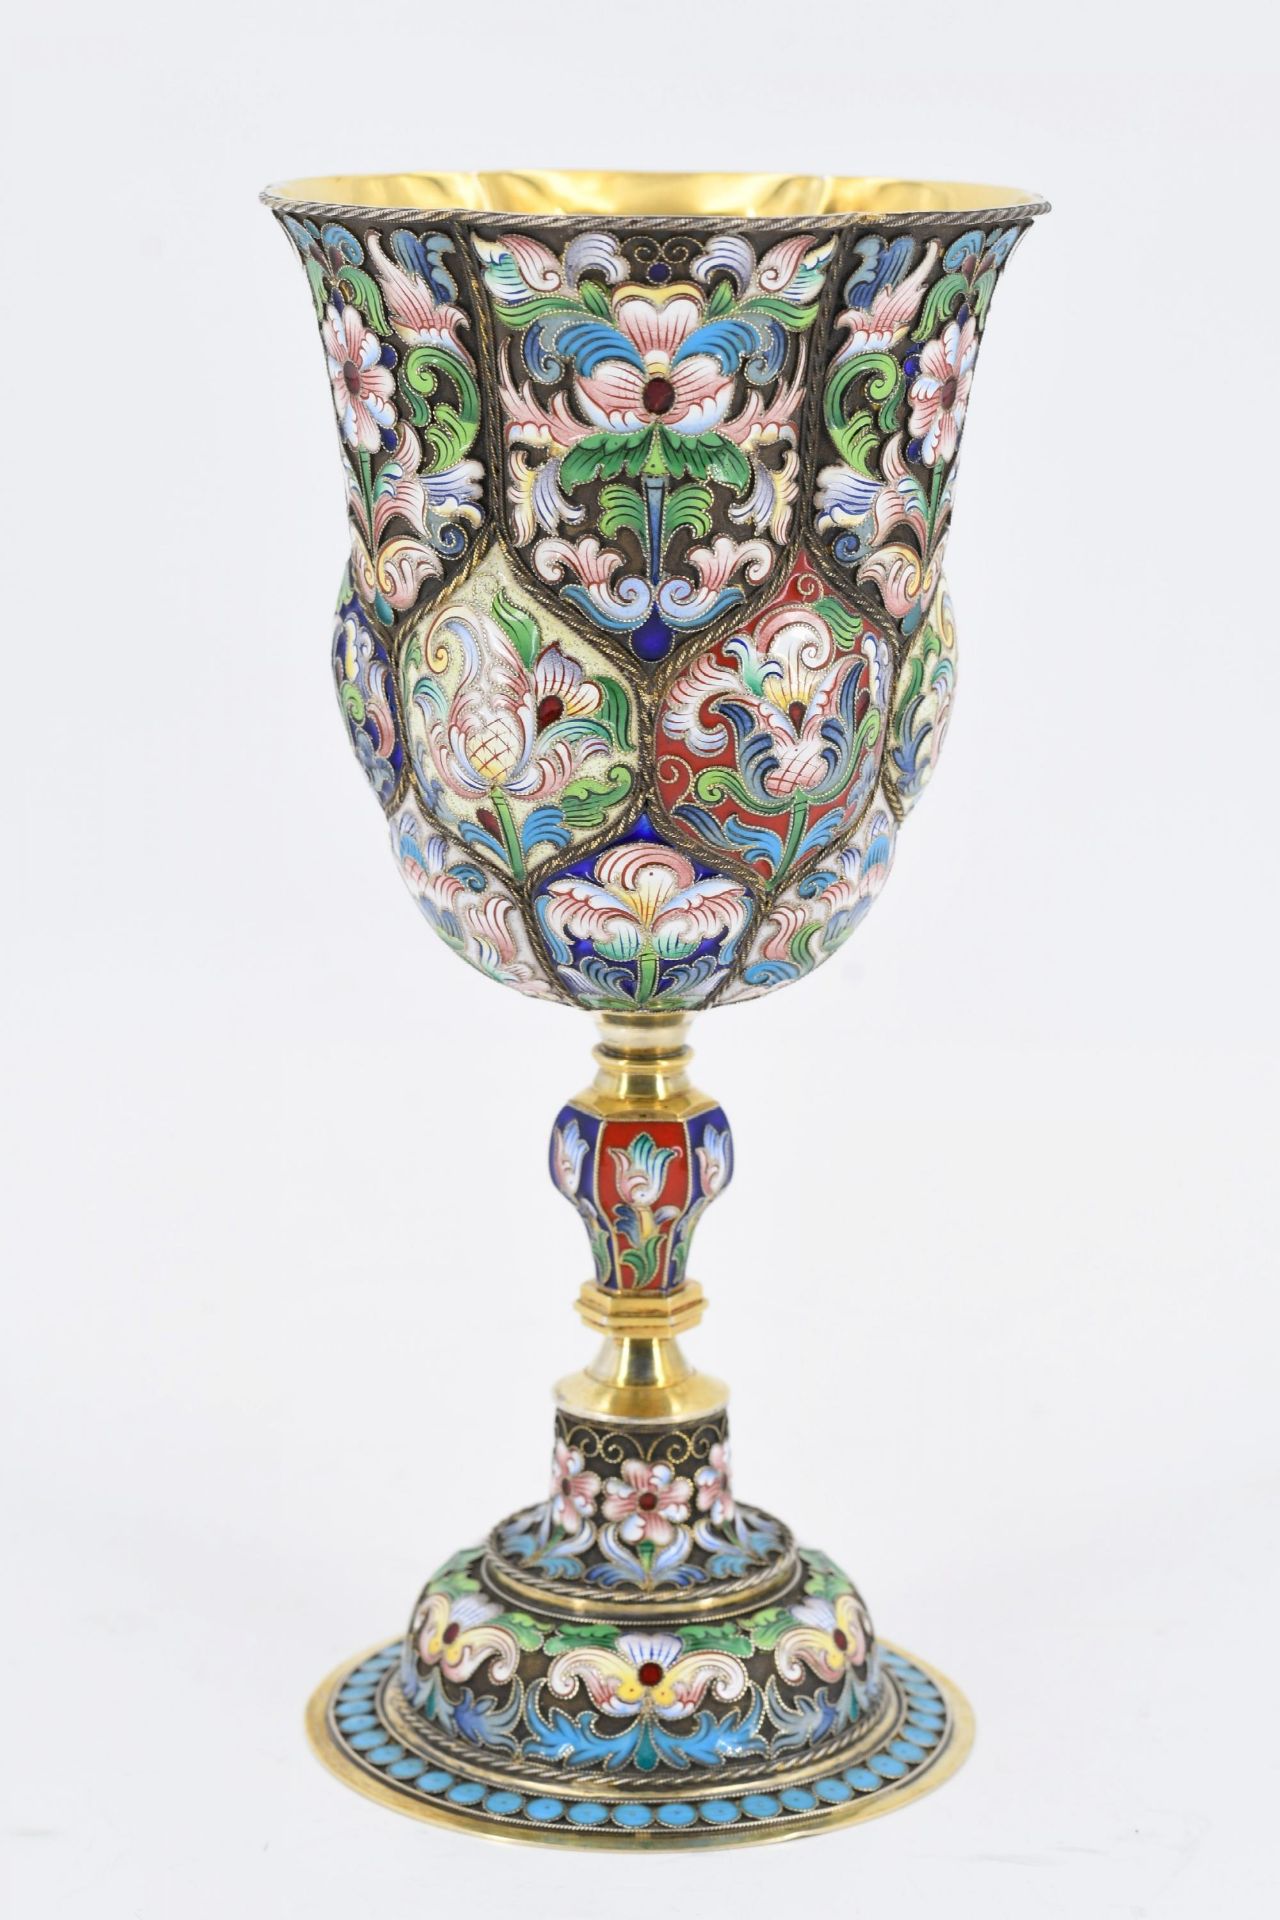 PRECIOUS SET OF SIX SILVER GOBLETS WITH CLOISONNÉ DECOR - Image 2 of 7